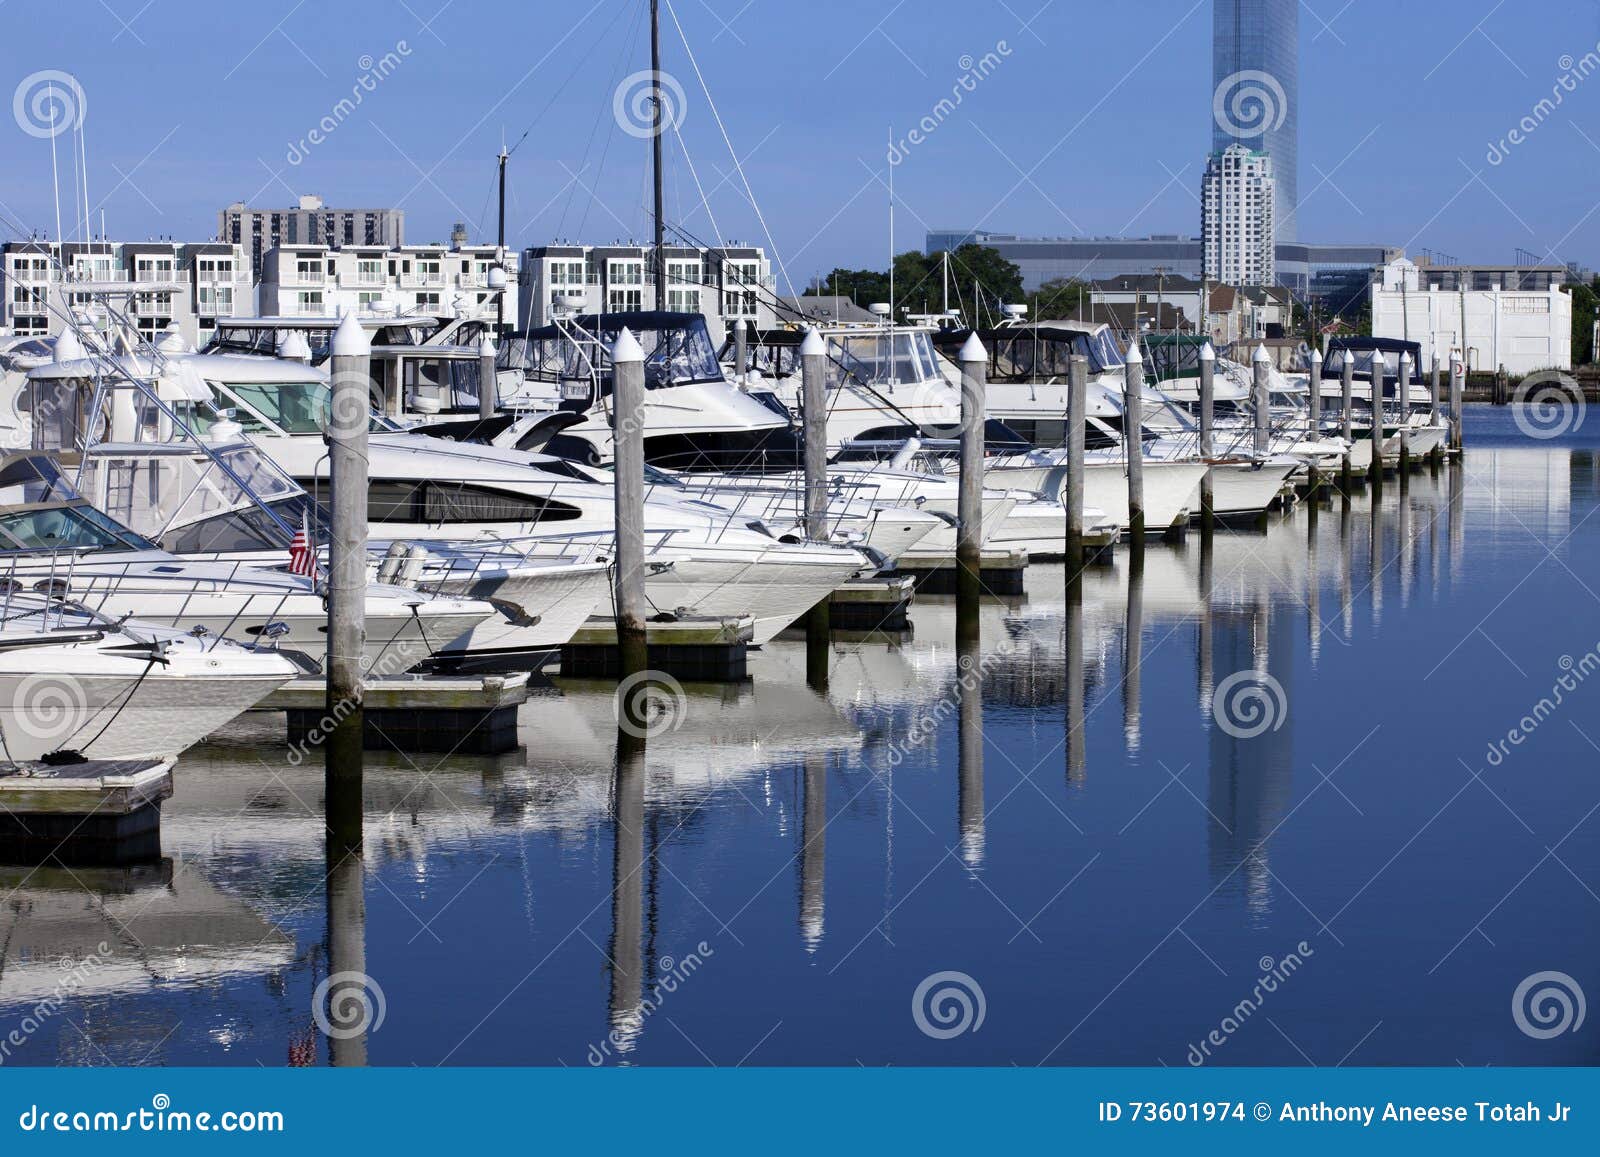 sport fishing boats and yacht in a marina